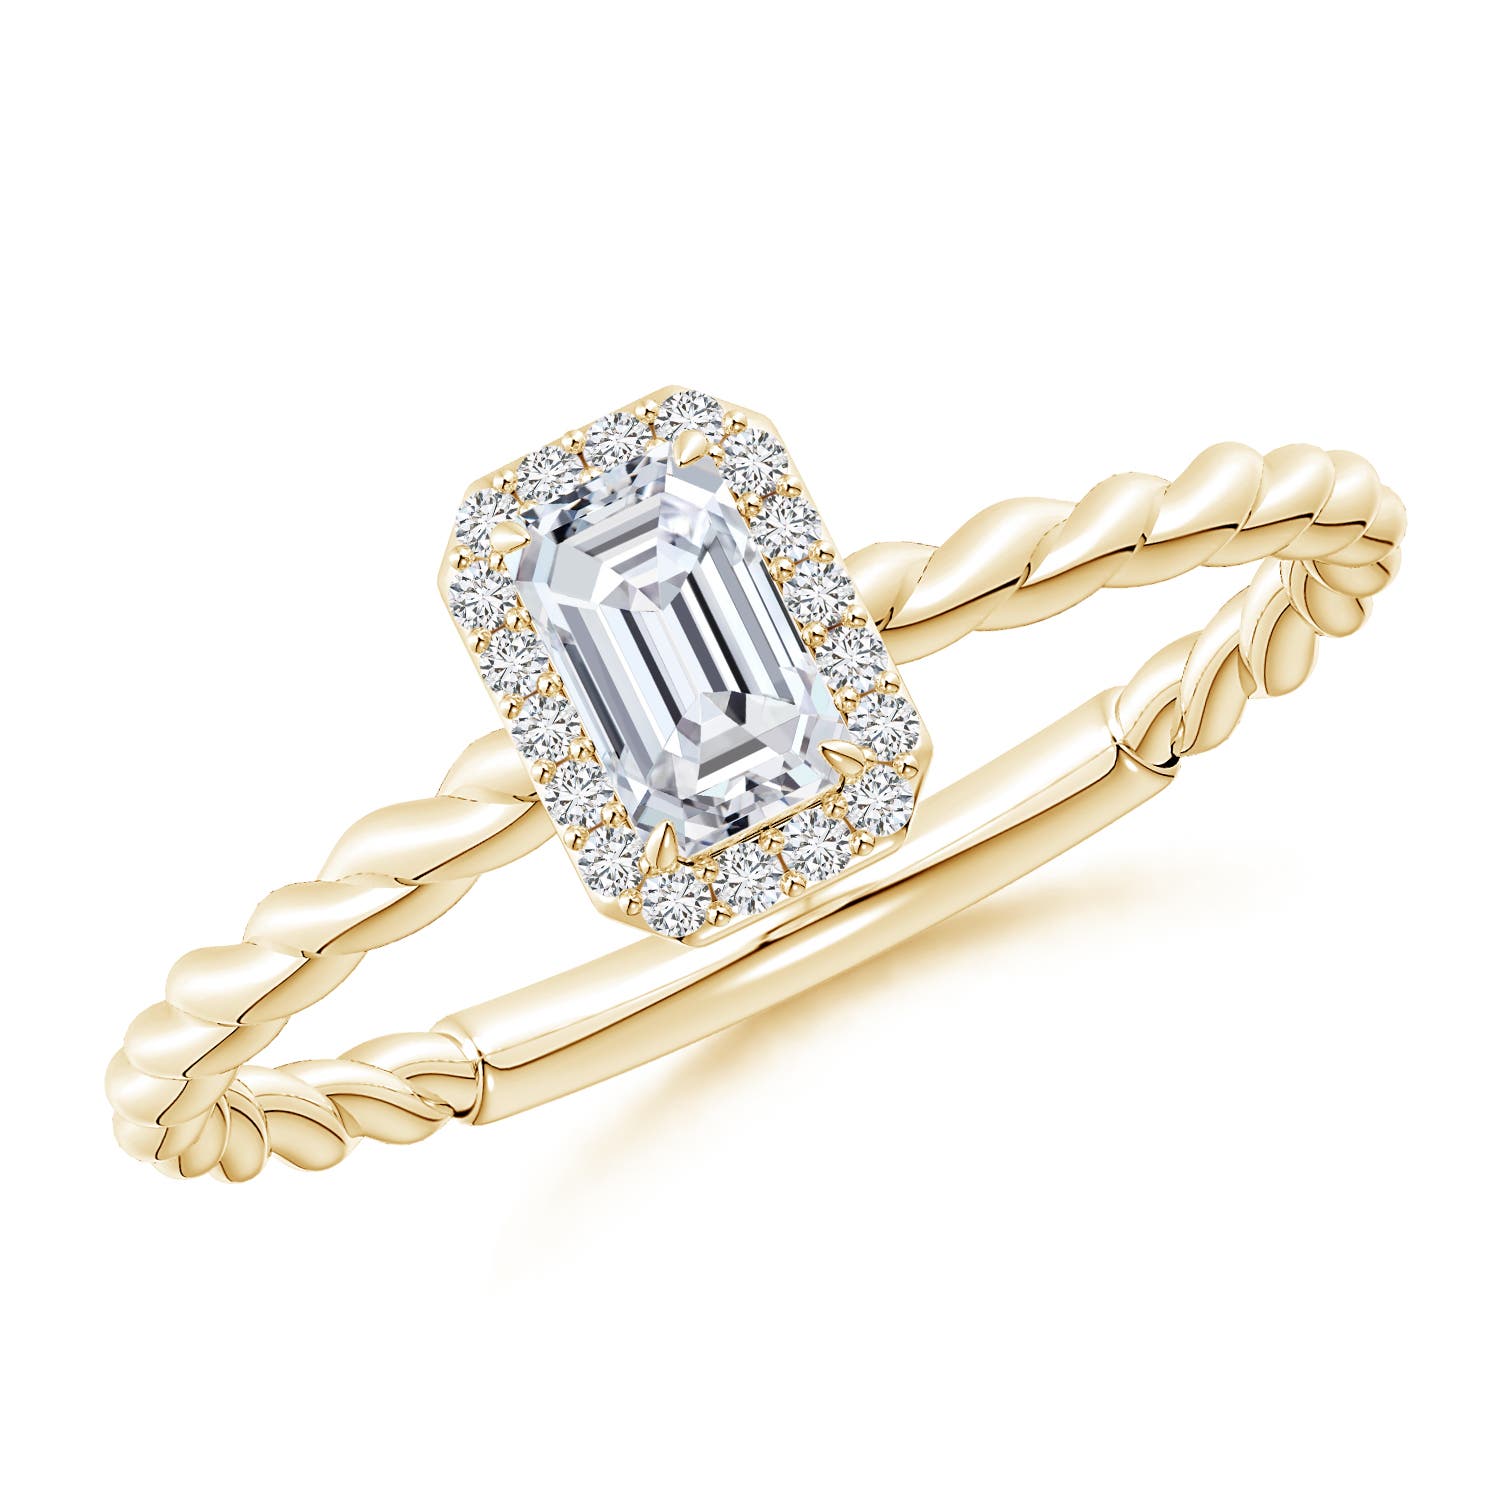 H, SI2 / 0.38 CT / 14 KT Yellow Gold